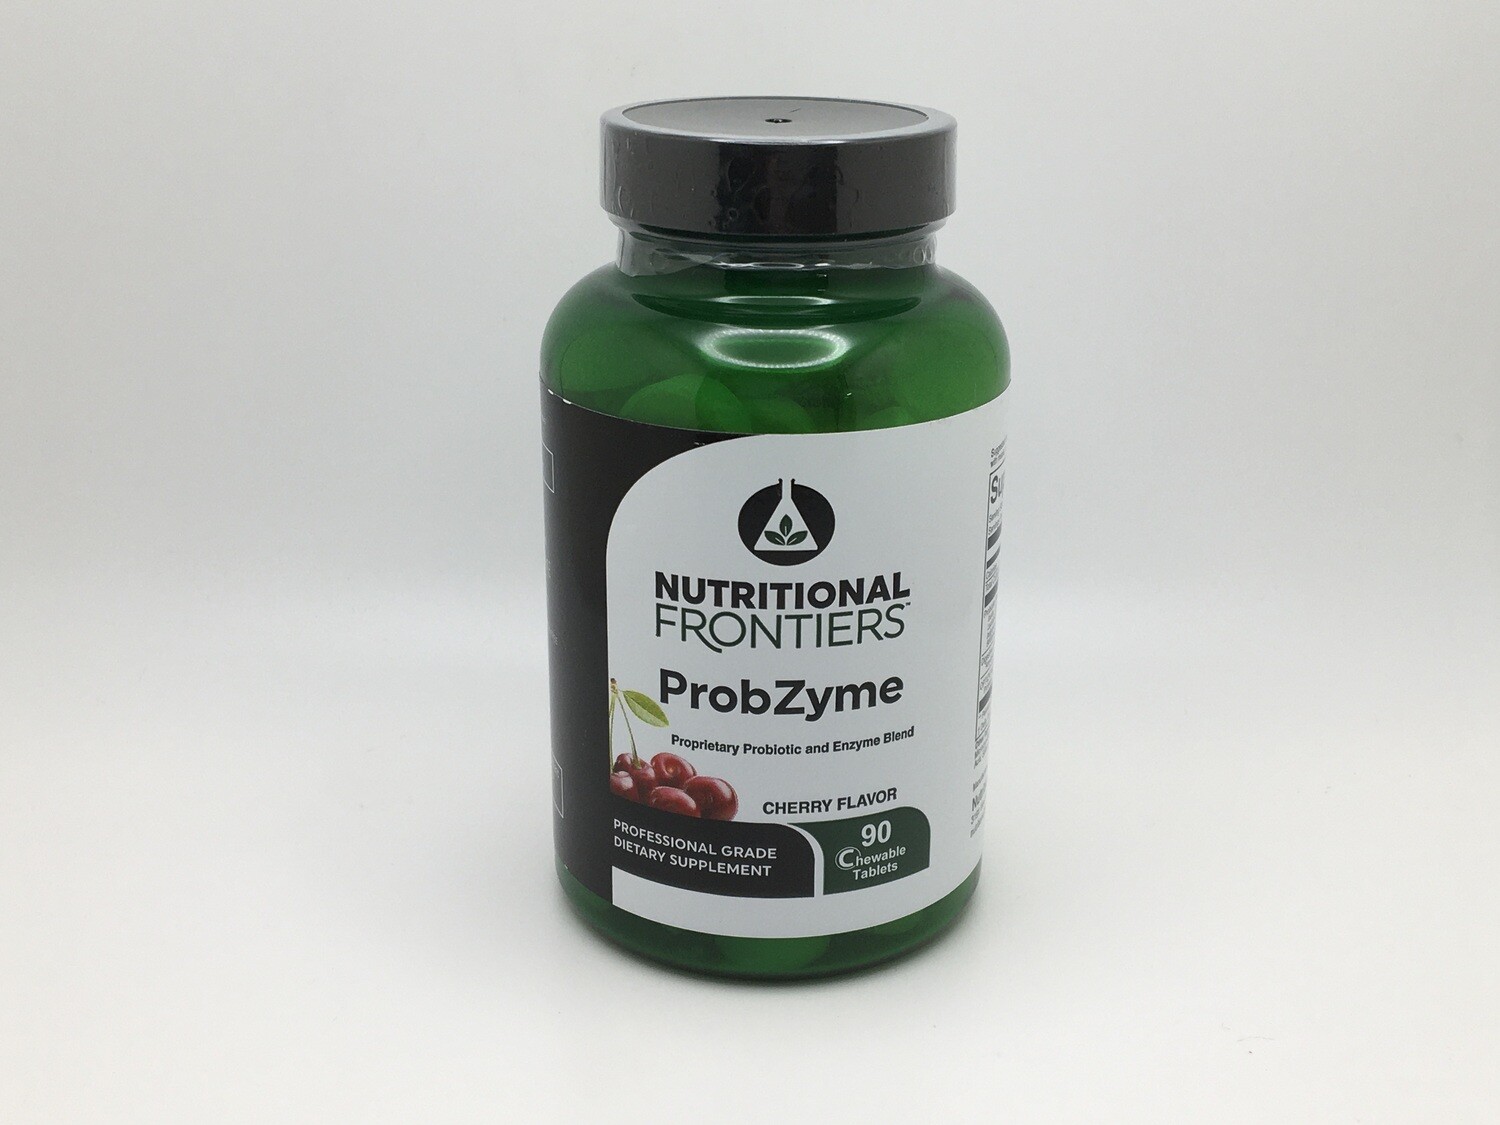 Prob Zyme 90 Chewables (Nutritional Frontiers) Cherry